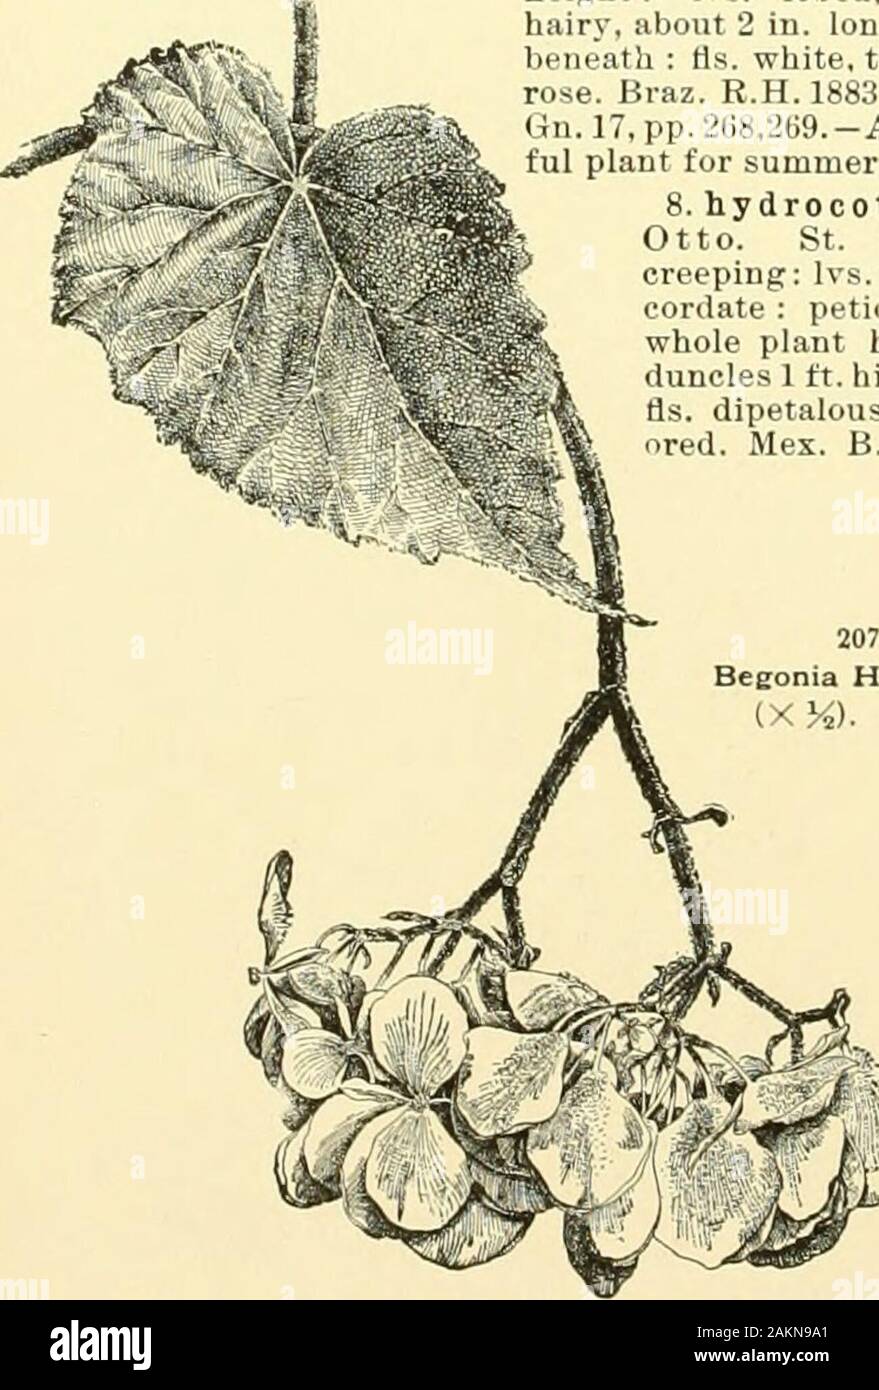 Cyclopedia of American horticulture, comprising suggestions for cultivation of horticultural plants, descriptions of the species of fruits, vegetables, flowers and ornamental plants sold in the United States and Canada, together with geographical and biographical sketches, and a synopsis of the vegetable kingdom . tis the onlyBegonia in cult, with thick, felted, peltate, silvery Ivs. cc. Size of Ifs. small, less than 2 in. ivide. 6. Margarltae, Hort. (B. metdllica x echinosSpala).Plant 1-2 ft. high ; sts. purple, hairy : Ivs. ovate-acumi-nate, sinuously dentate, green above, red beneath ; fls. Stock Photo